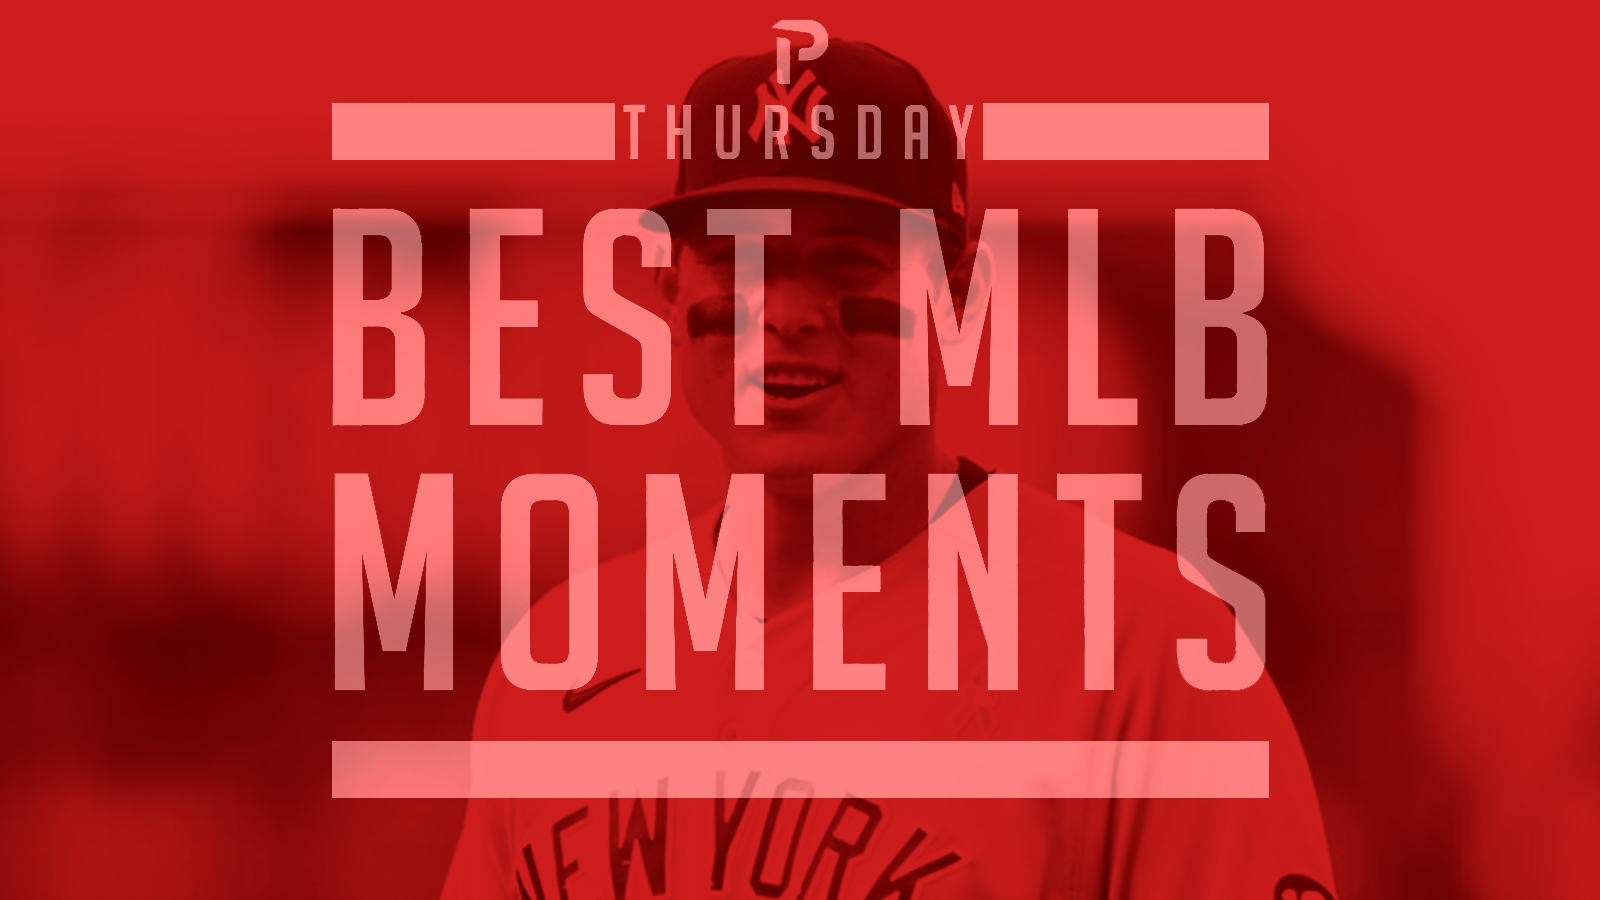 The 5 Best MLB Moments From Thursday Pitcher List